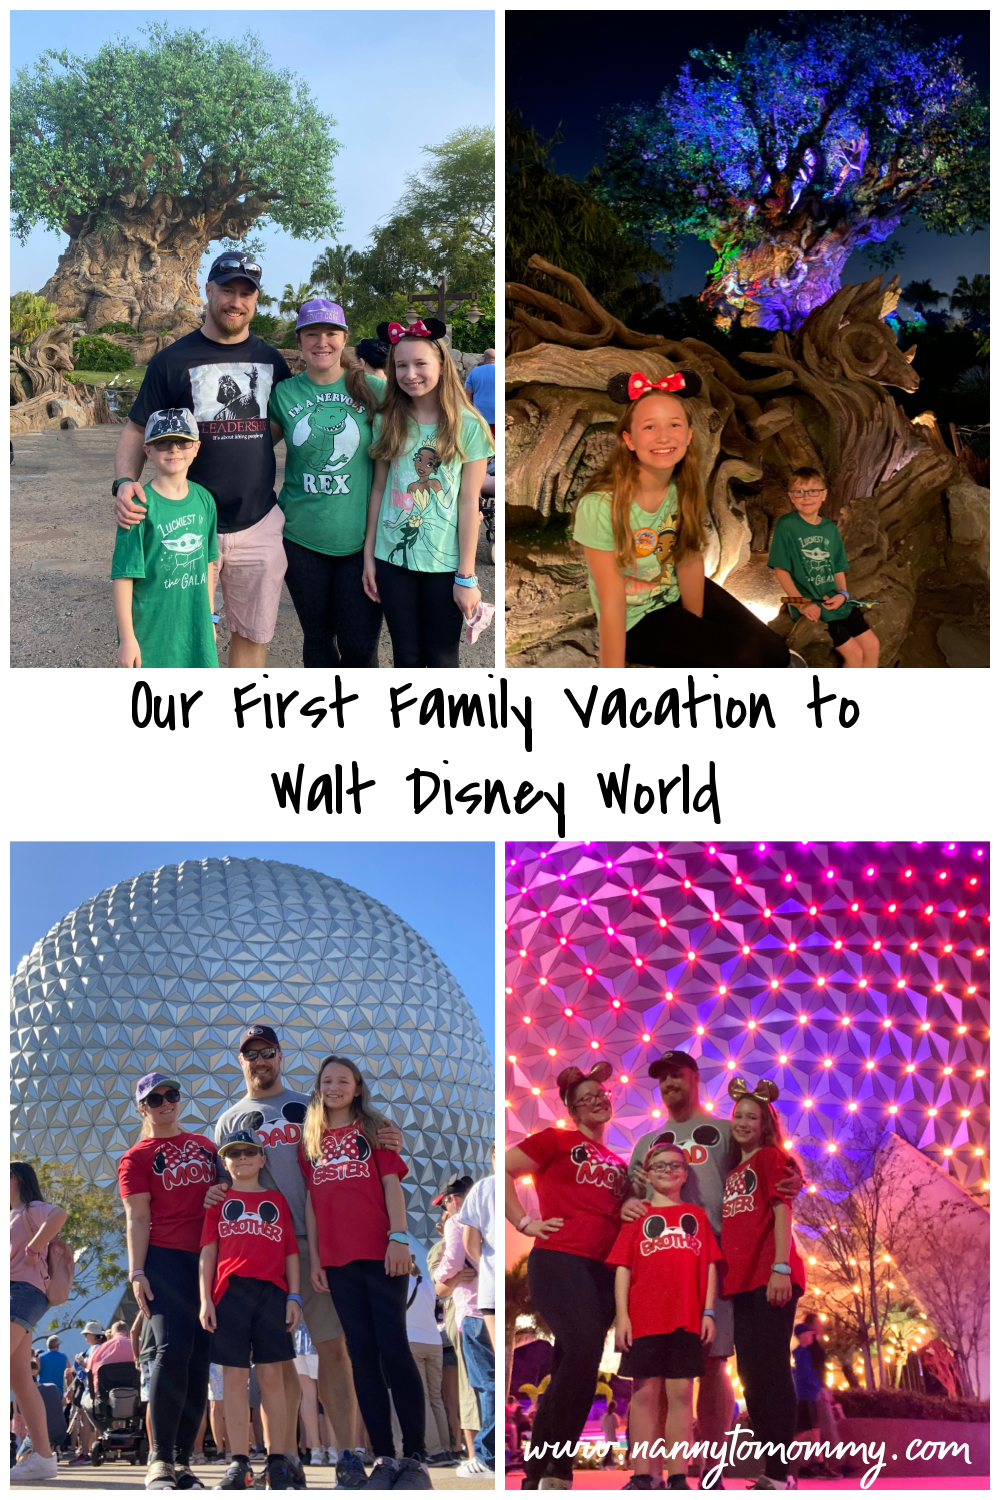 Our First Family Vacation to Walt Disney World